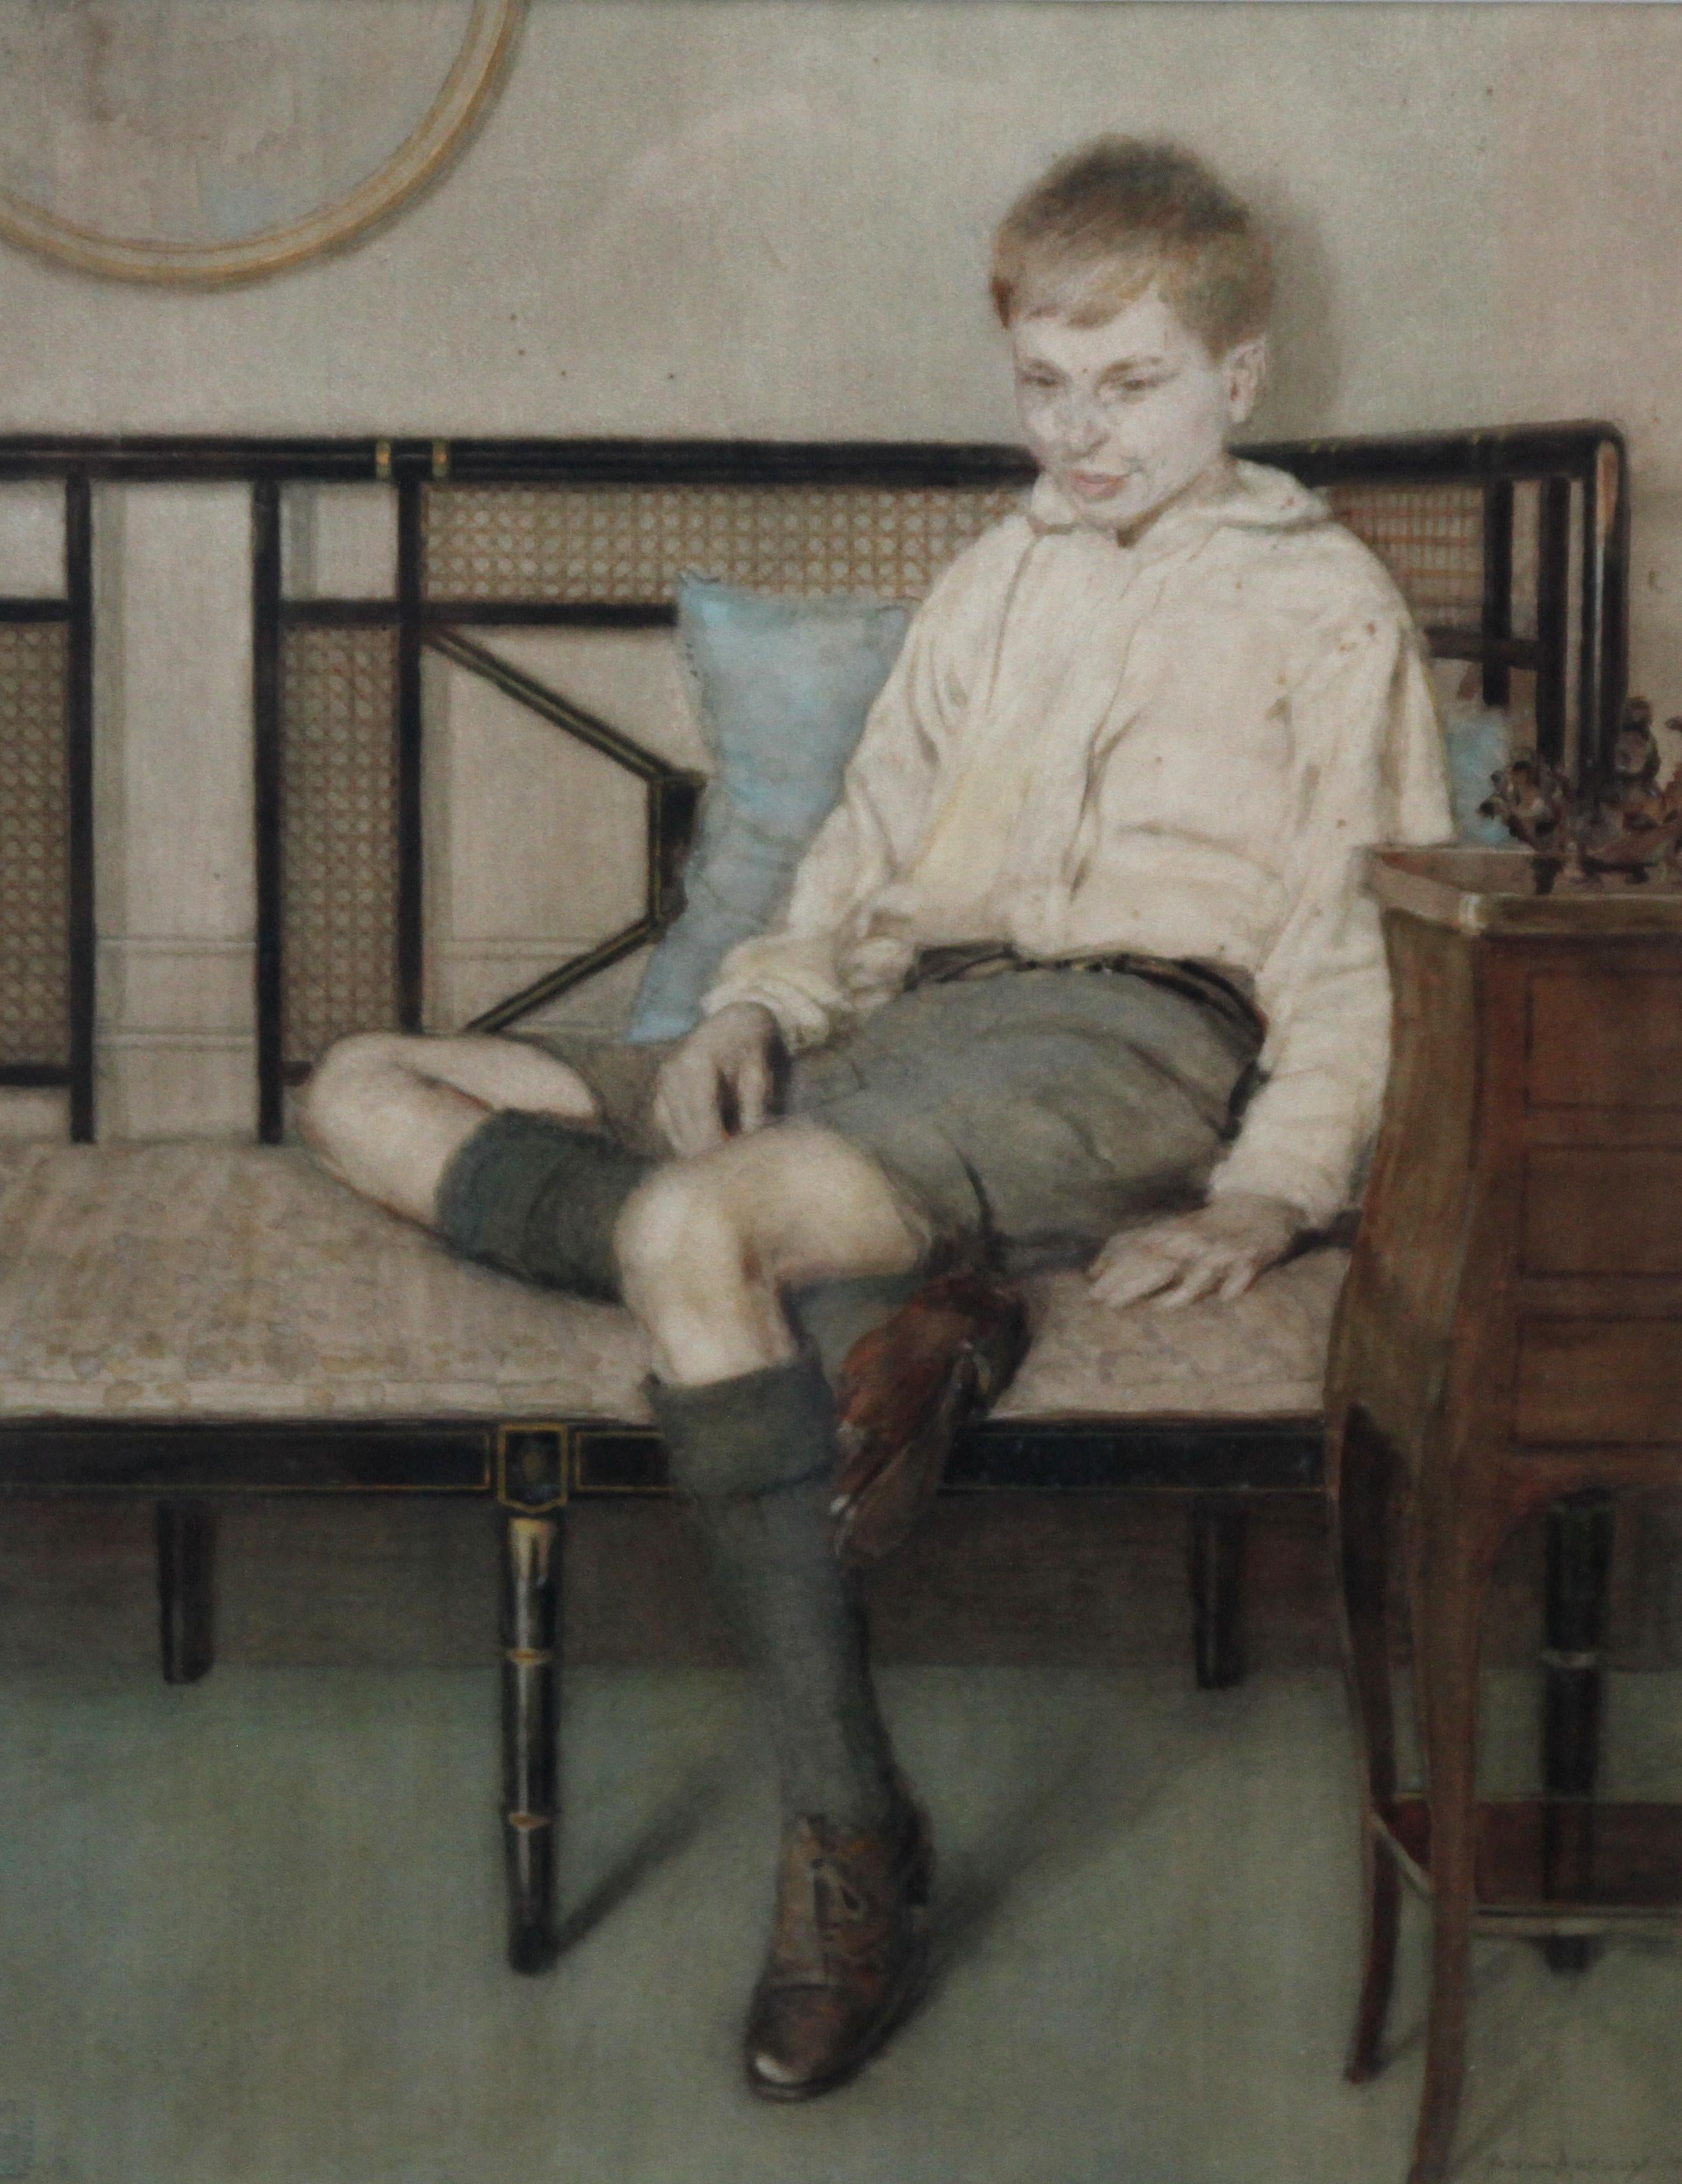 This large stunning watercolour portrait was painted circa 1930 by noted British female artist Anna Airy. The portrait depicts a full length boy seated in a beautiful Art Deco interior. A strong 20th century portrait, it is in good condition and